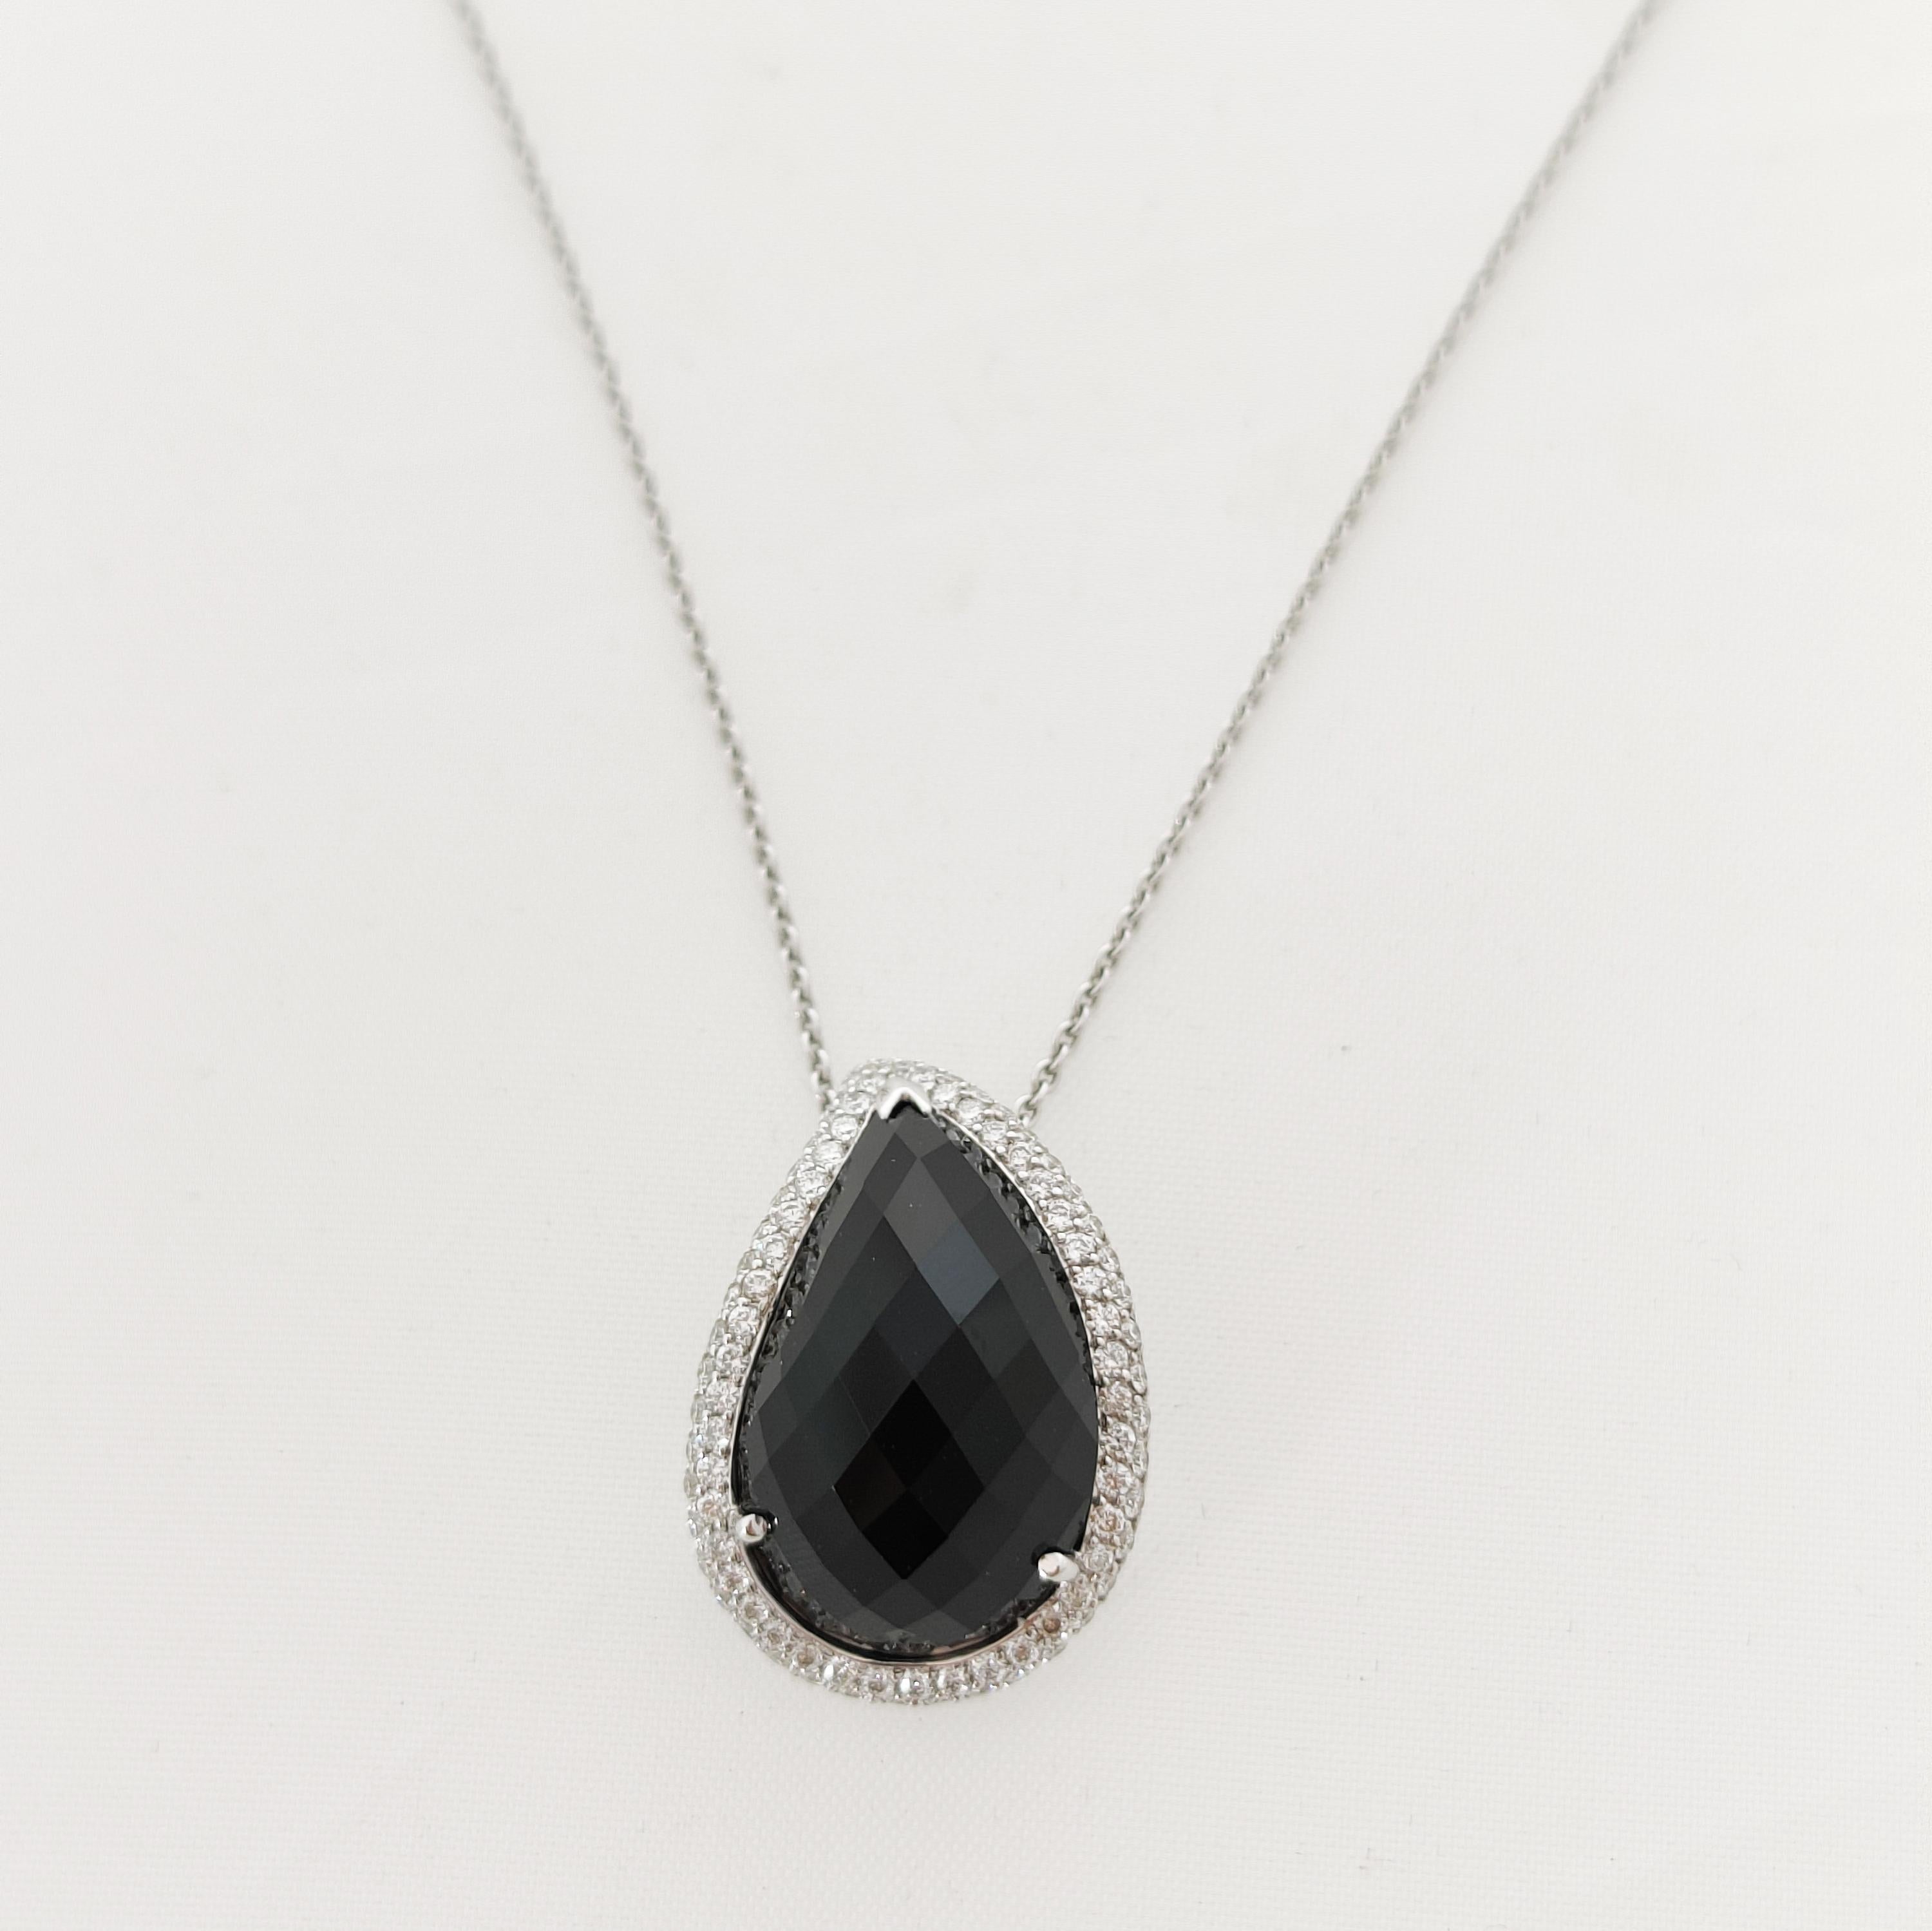 Paisley drop onyx and diamond pendant in 18 karat white gold. Glamorous style pendant with a paisley shaped multi-faceted black onyx, held by a halo of round cut diamonds. All of the smaller round cut diamonds have a total carat weight of 0.52ct and